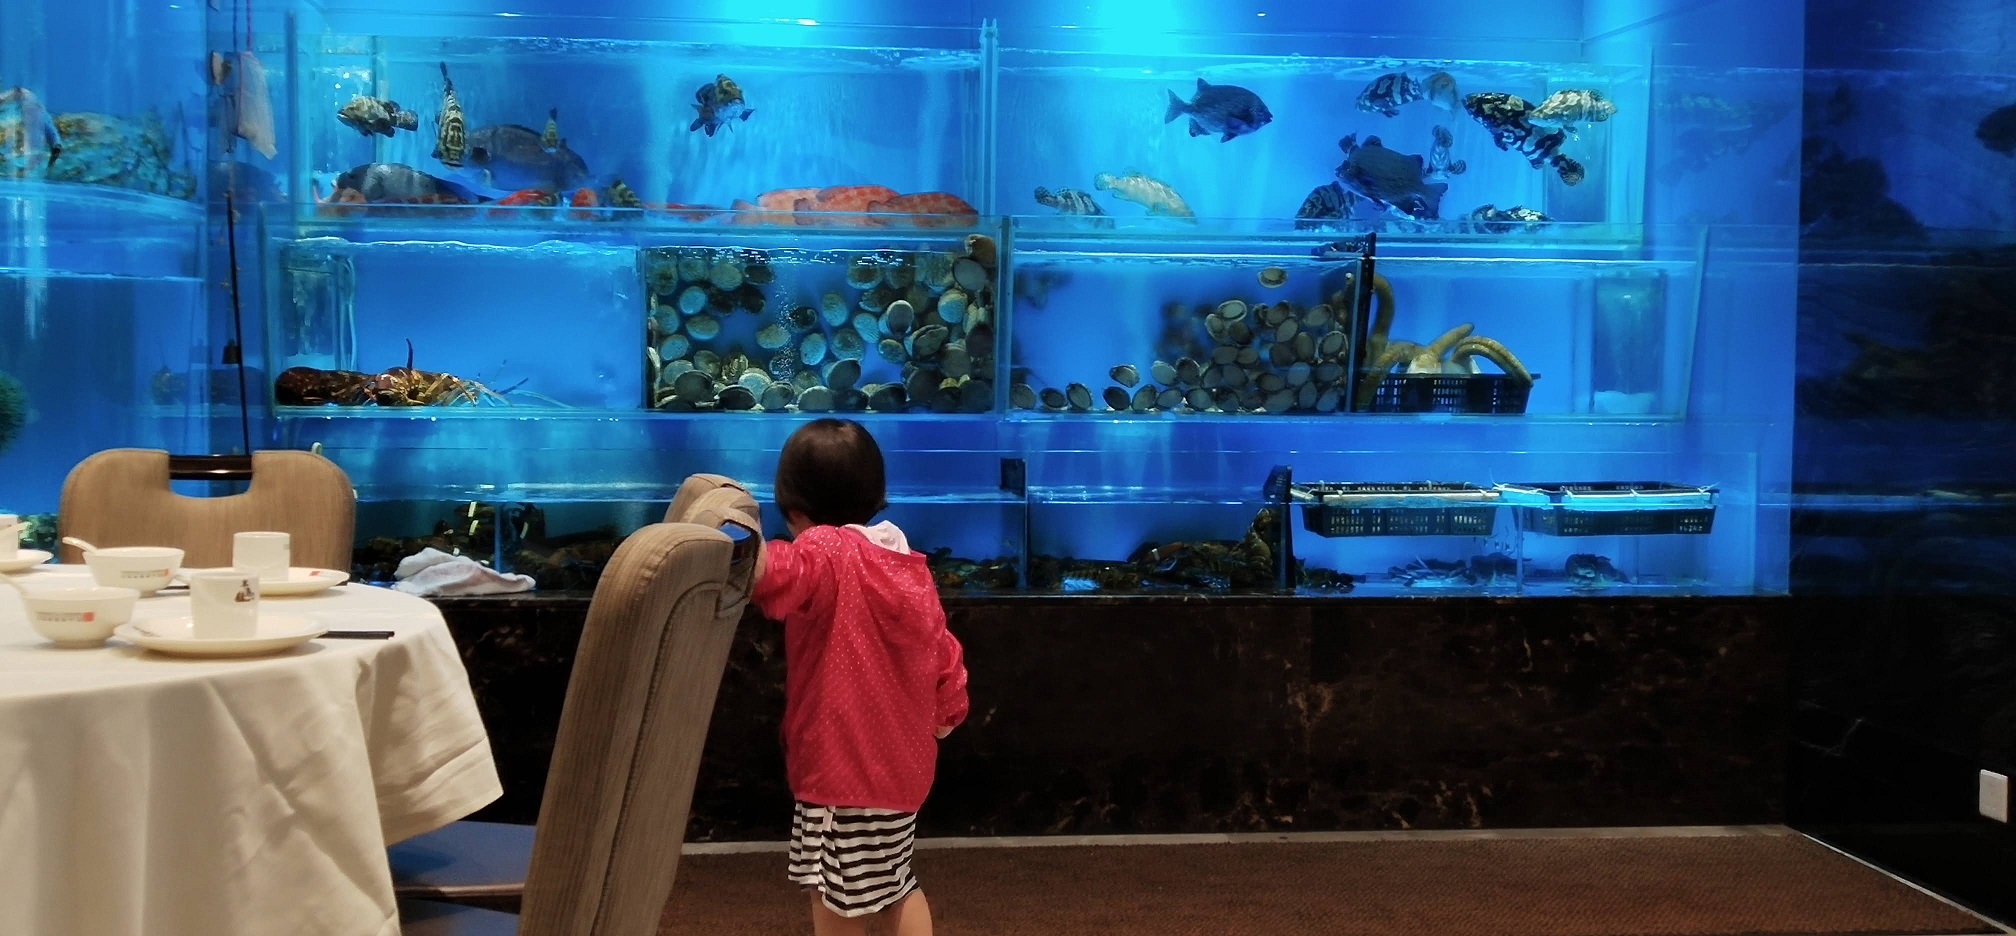 little girl stands in front of seafood aquarium